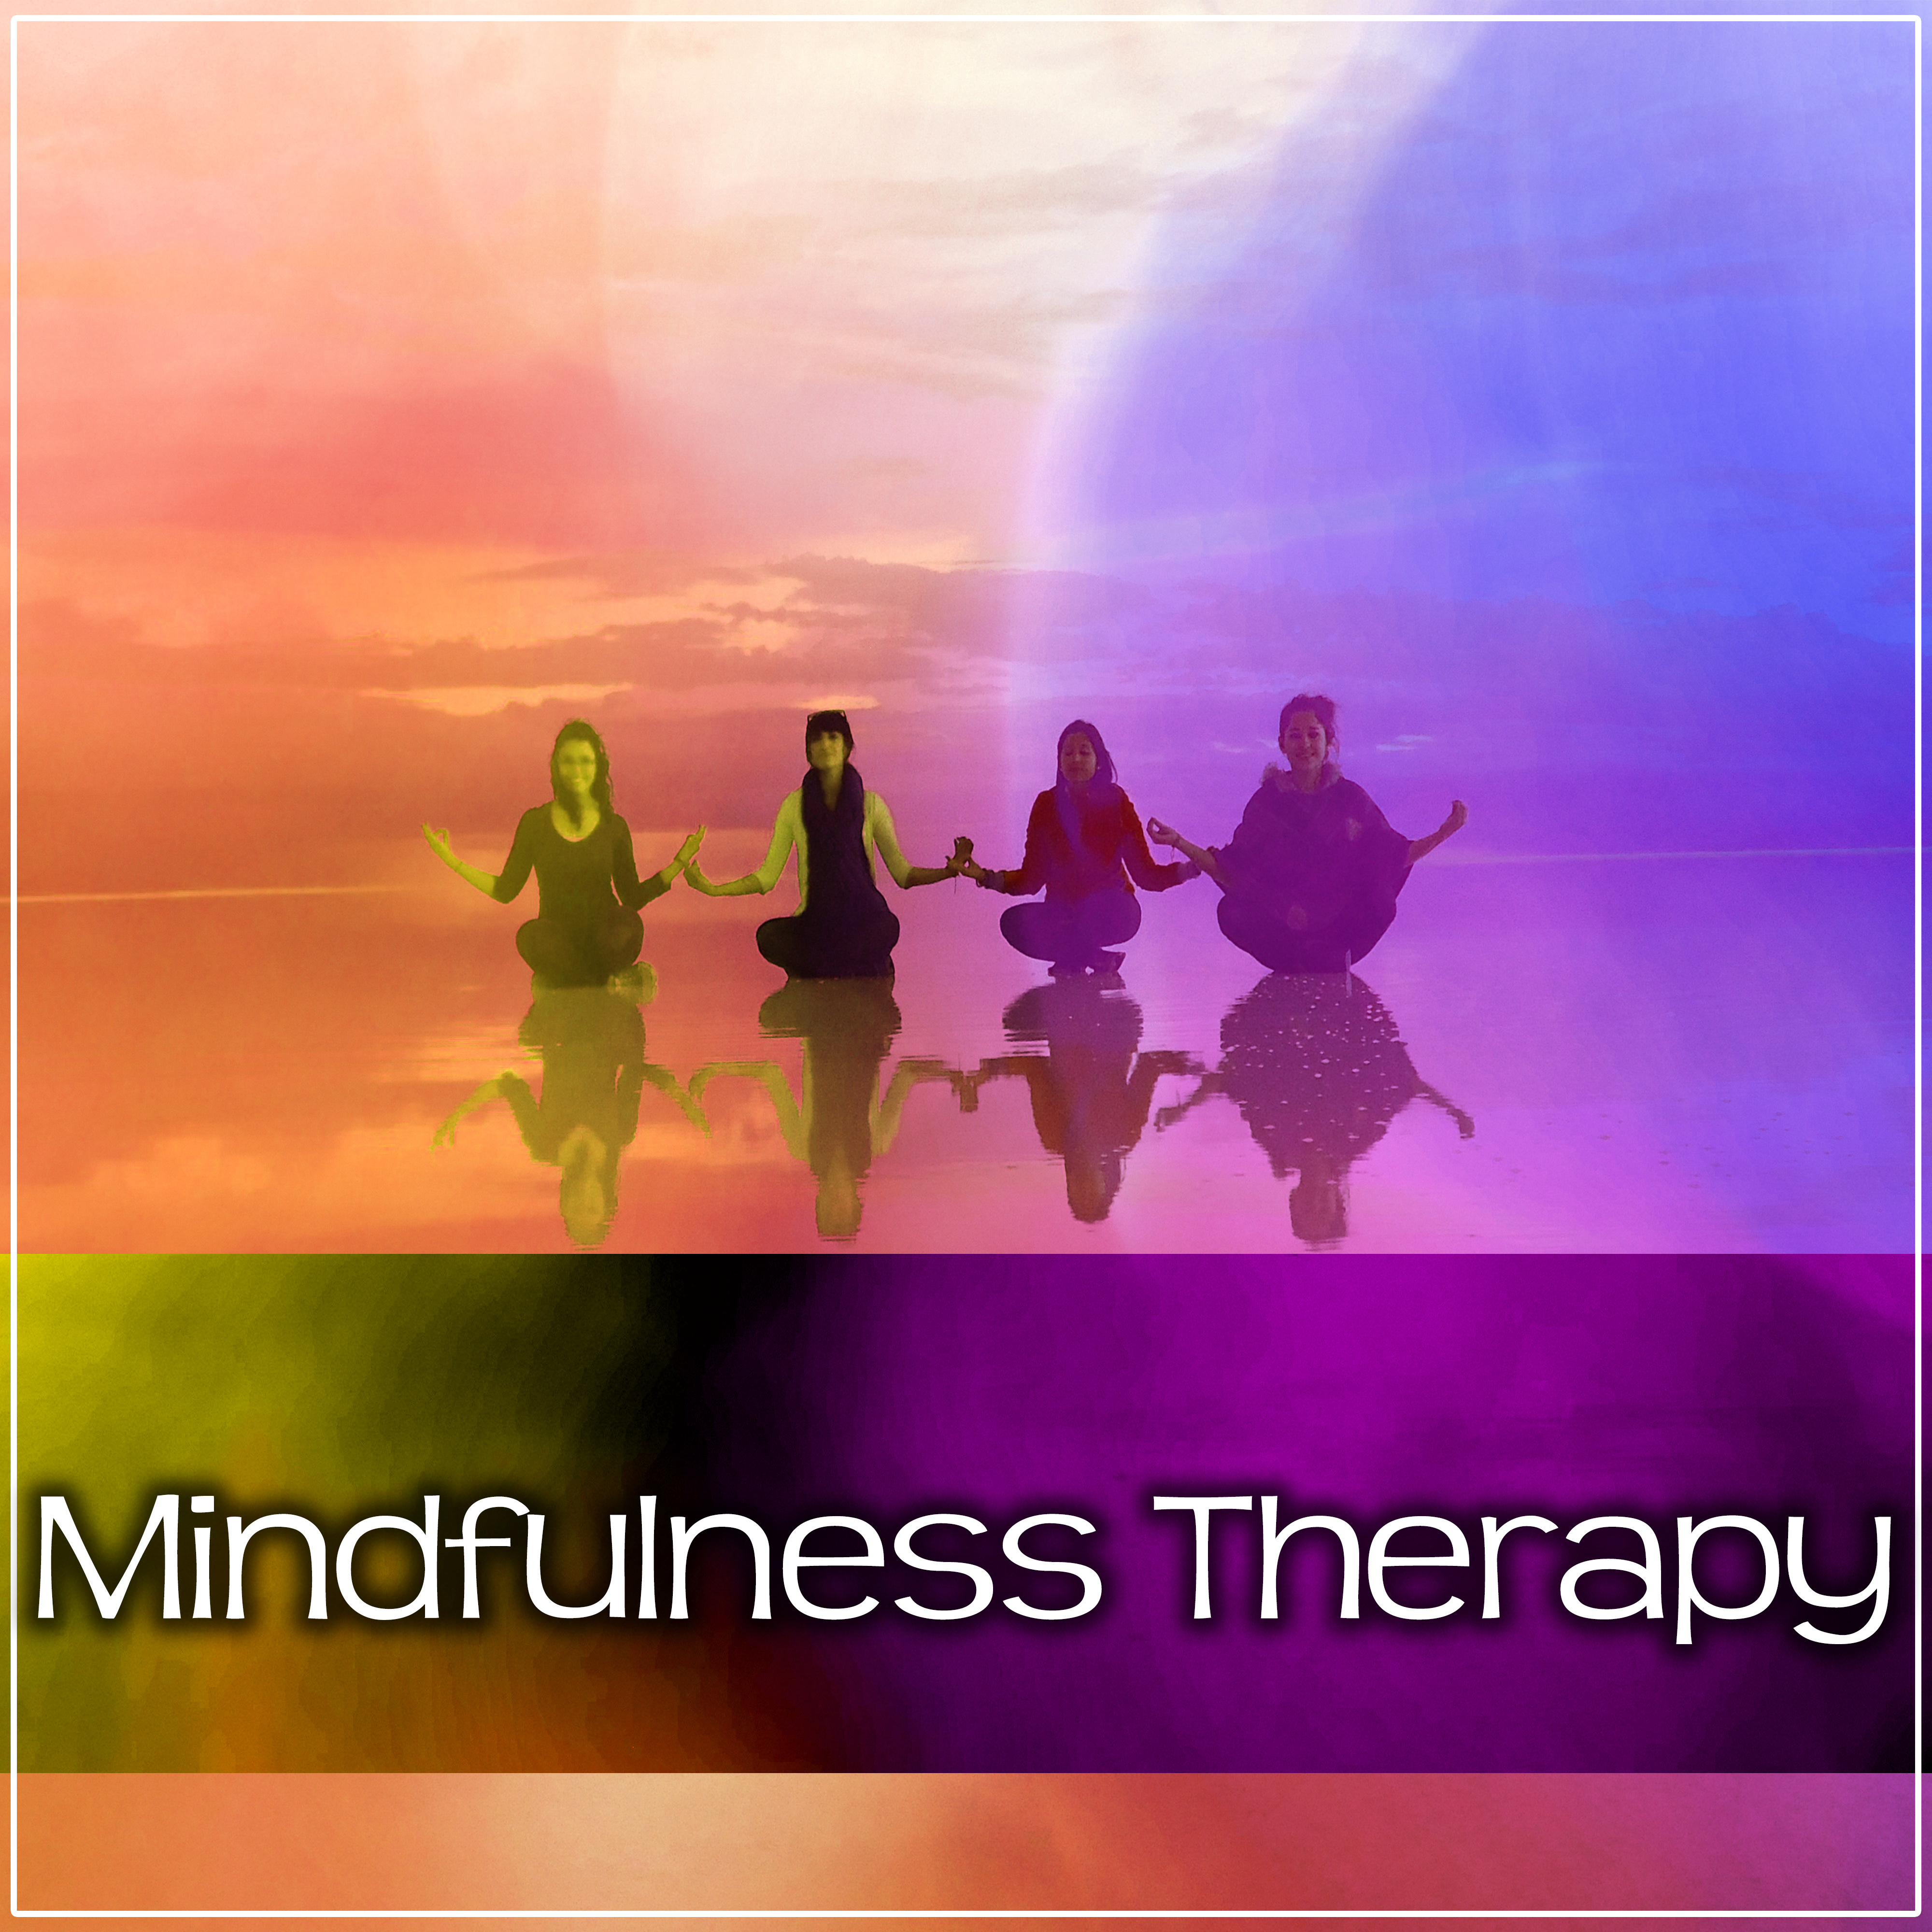 Mindfulness Therapy - Spiritual Healing Sounds for Mindfulness Meditations, Best  Way to Relax,  Calm Down, Rest